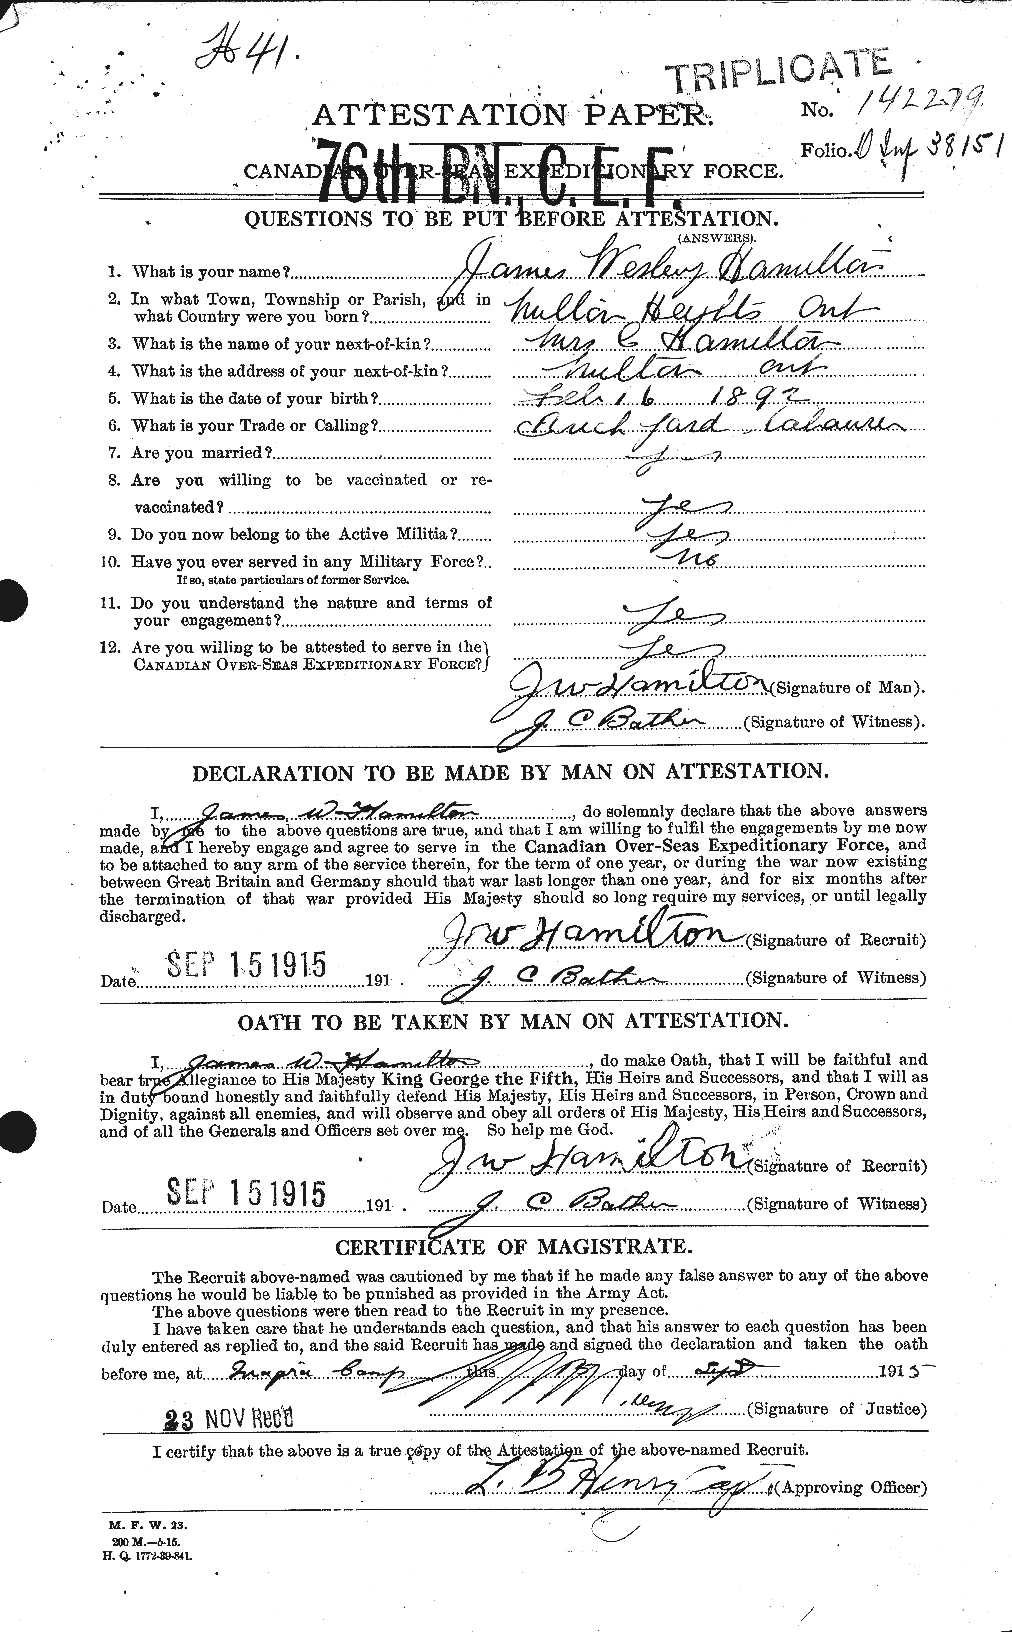 Personnel Records of the First World War - CEF 373010a